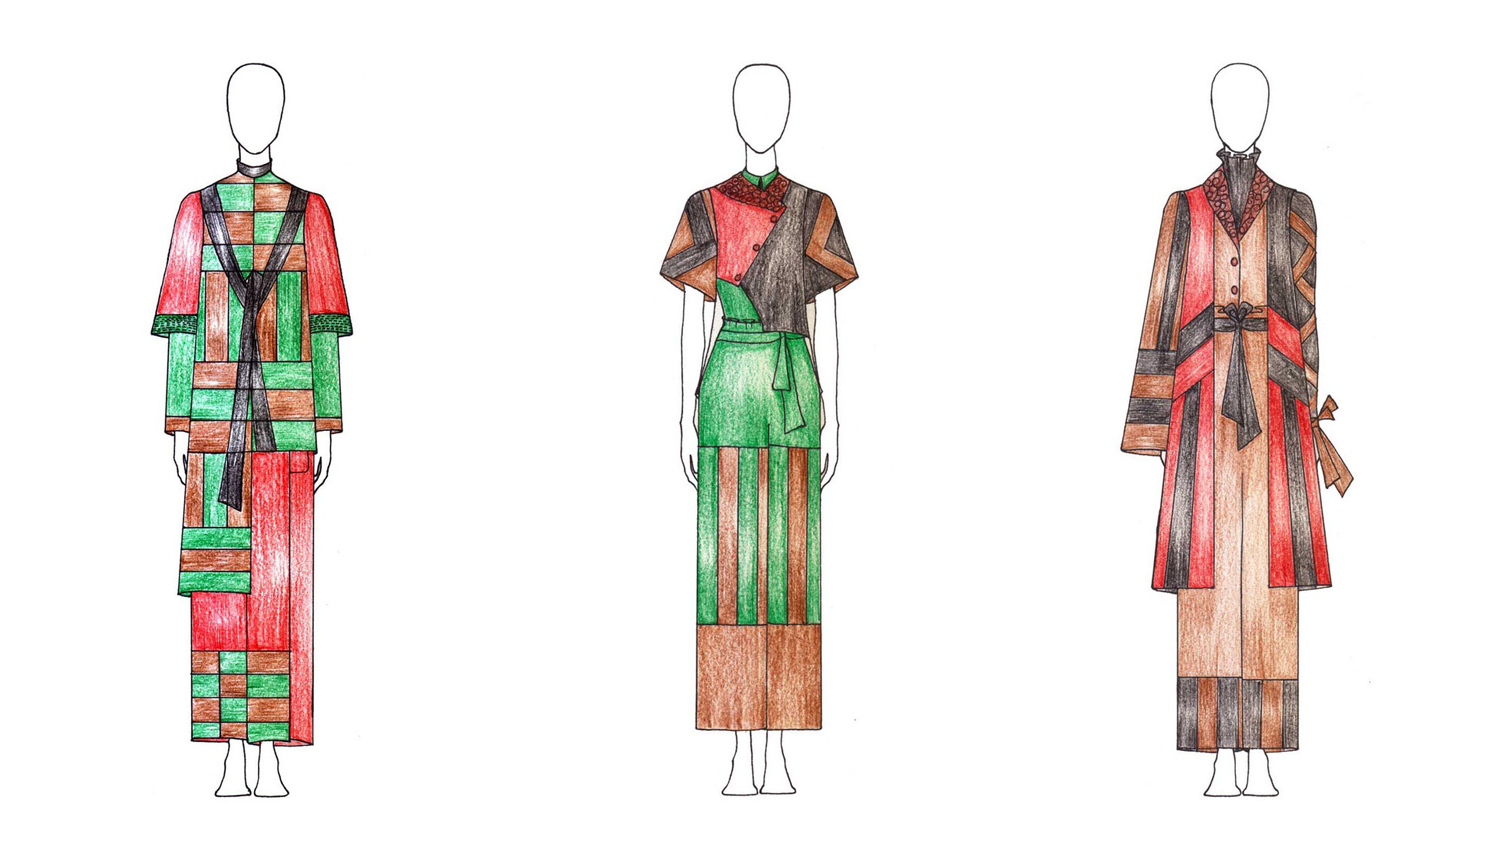 Redress Design Award 2019 submission